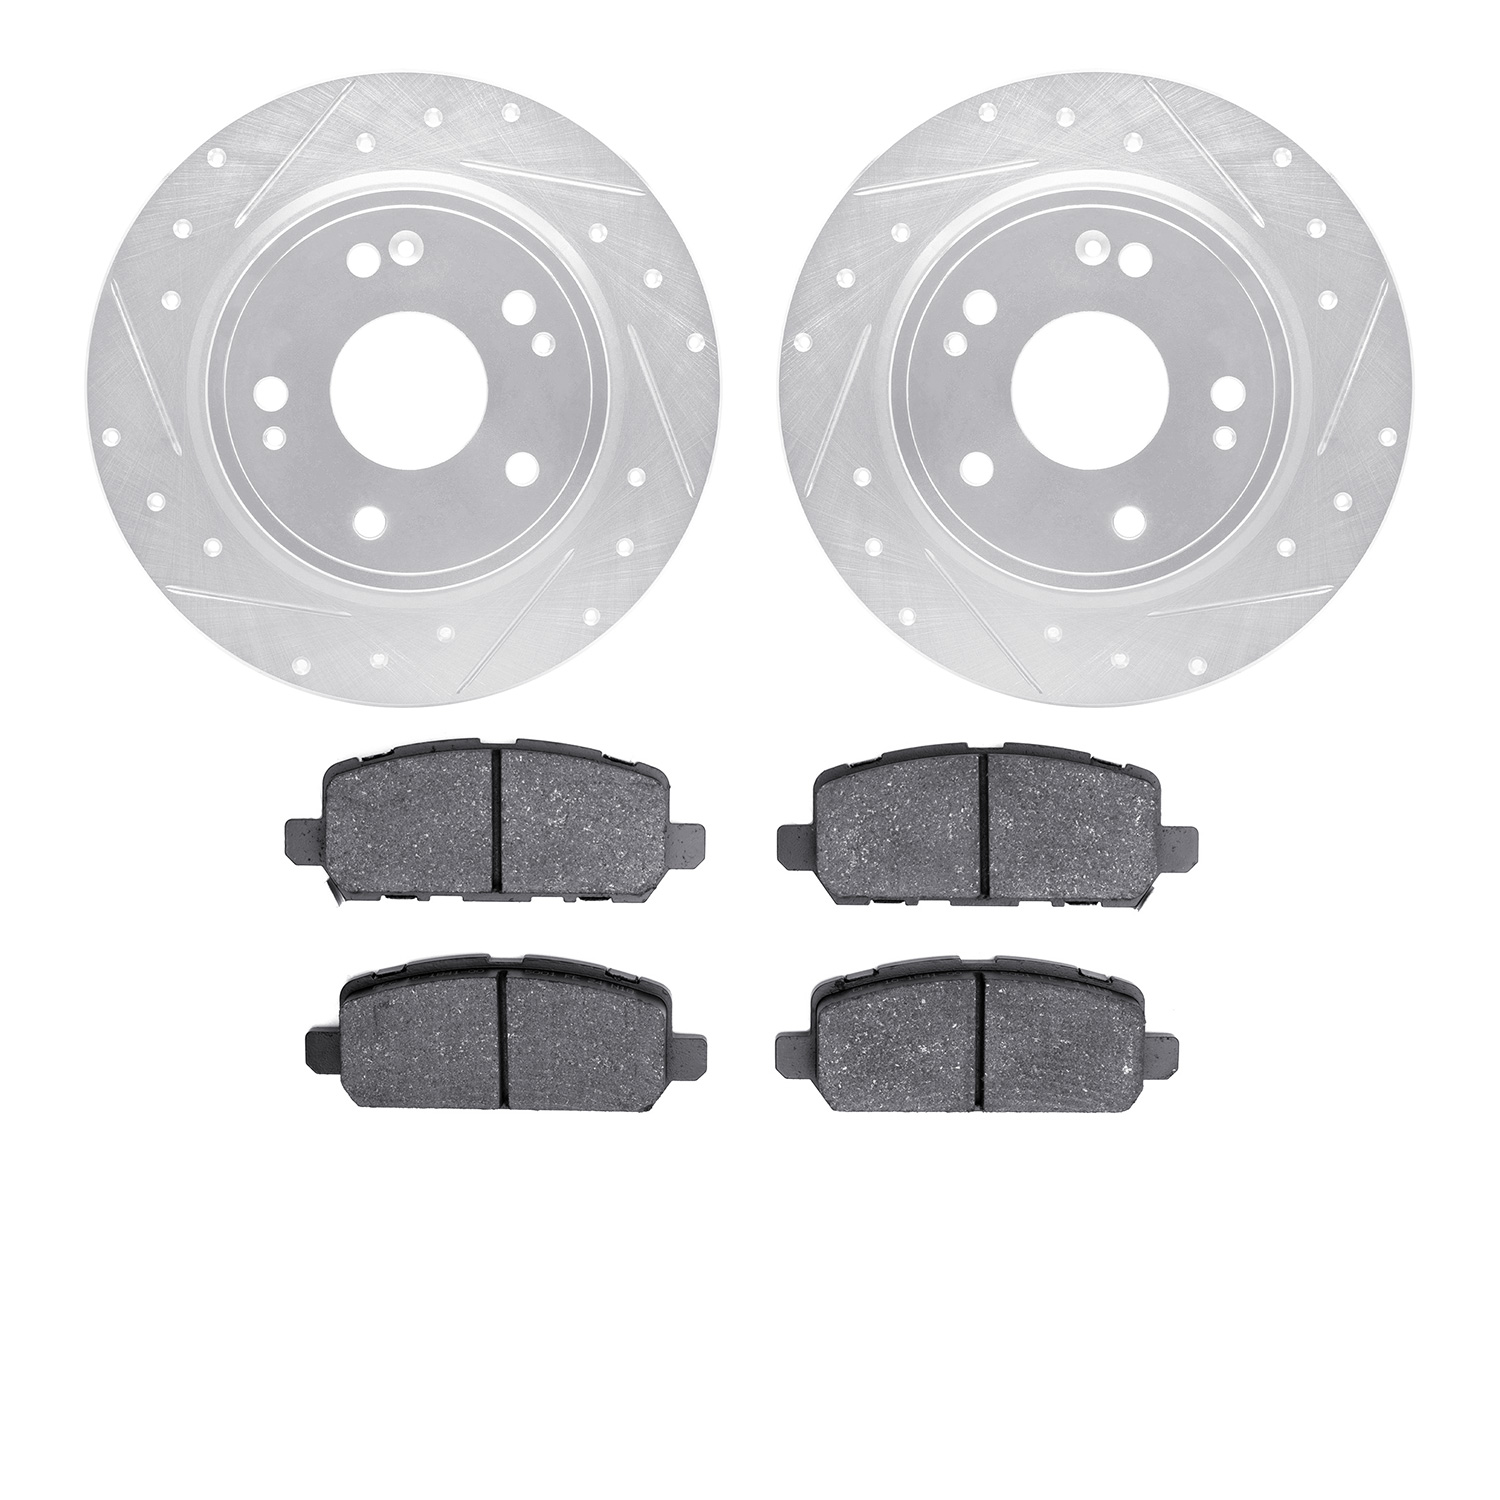 7502-59122 Drilled/Slotted Brake Rotors w/5000 Advanced Brake Pads Kit [Silver], Fits Select Acura/Honda, Position: Rear